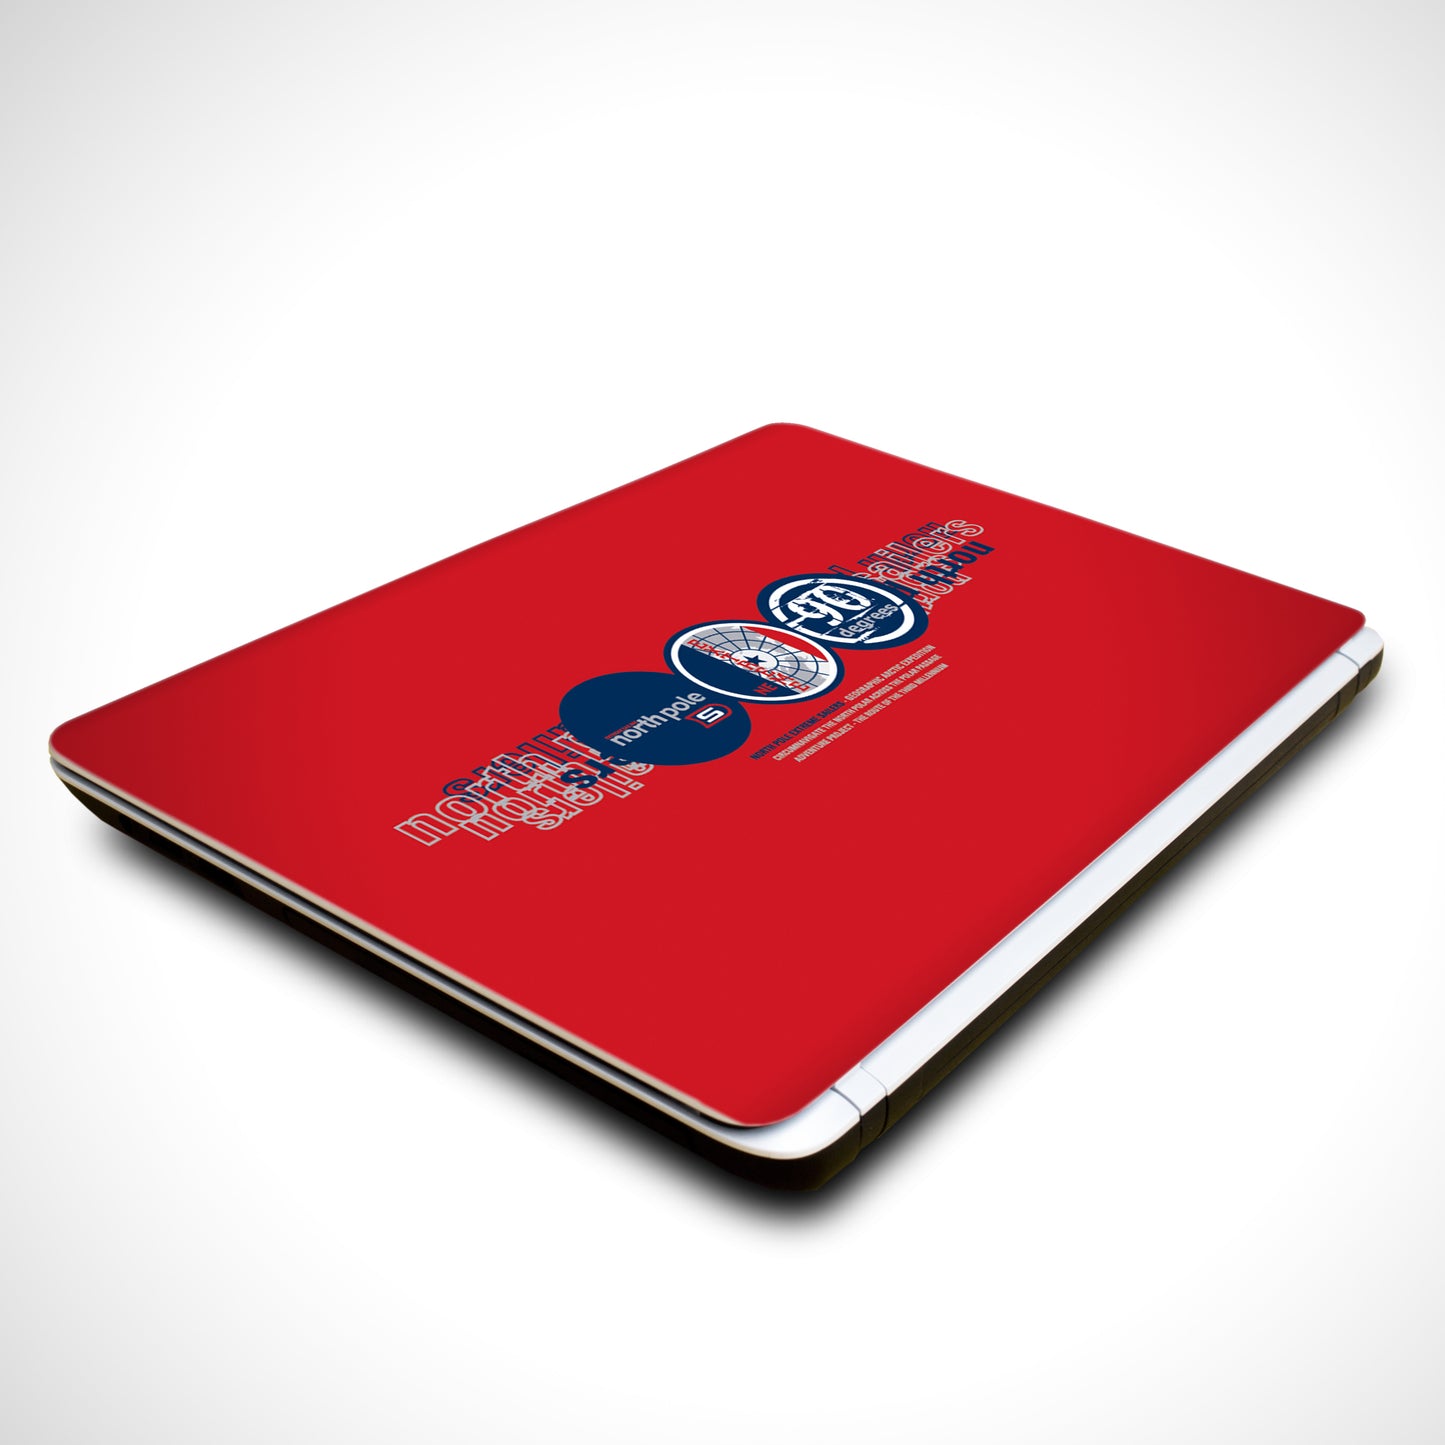 iberry's Vinyl Laptop Skin Sticker Collection for Dell, Hp, Toshiba, Acer, Asus & All Models (Upto 15.6 inches) -04